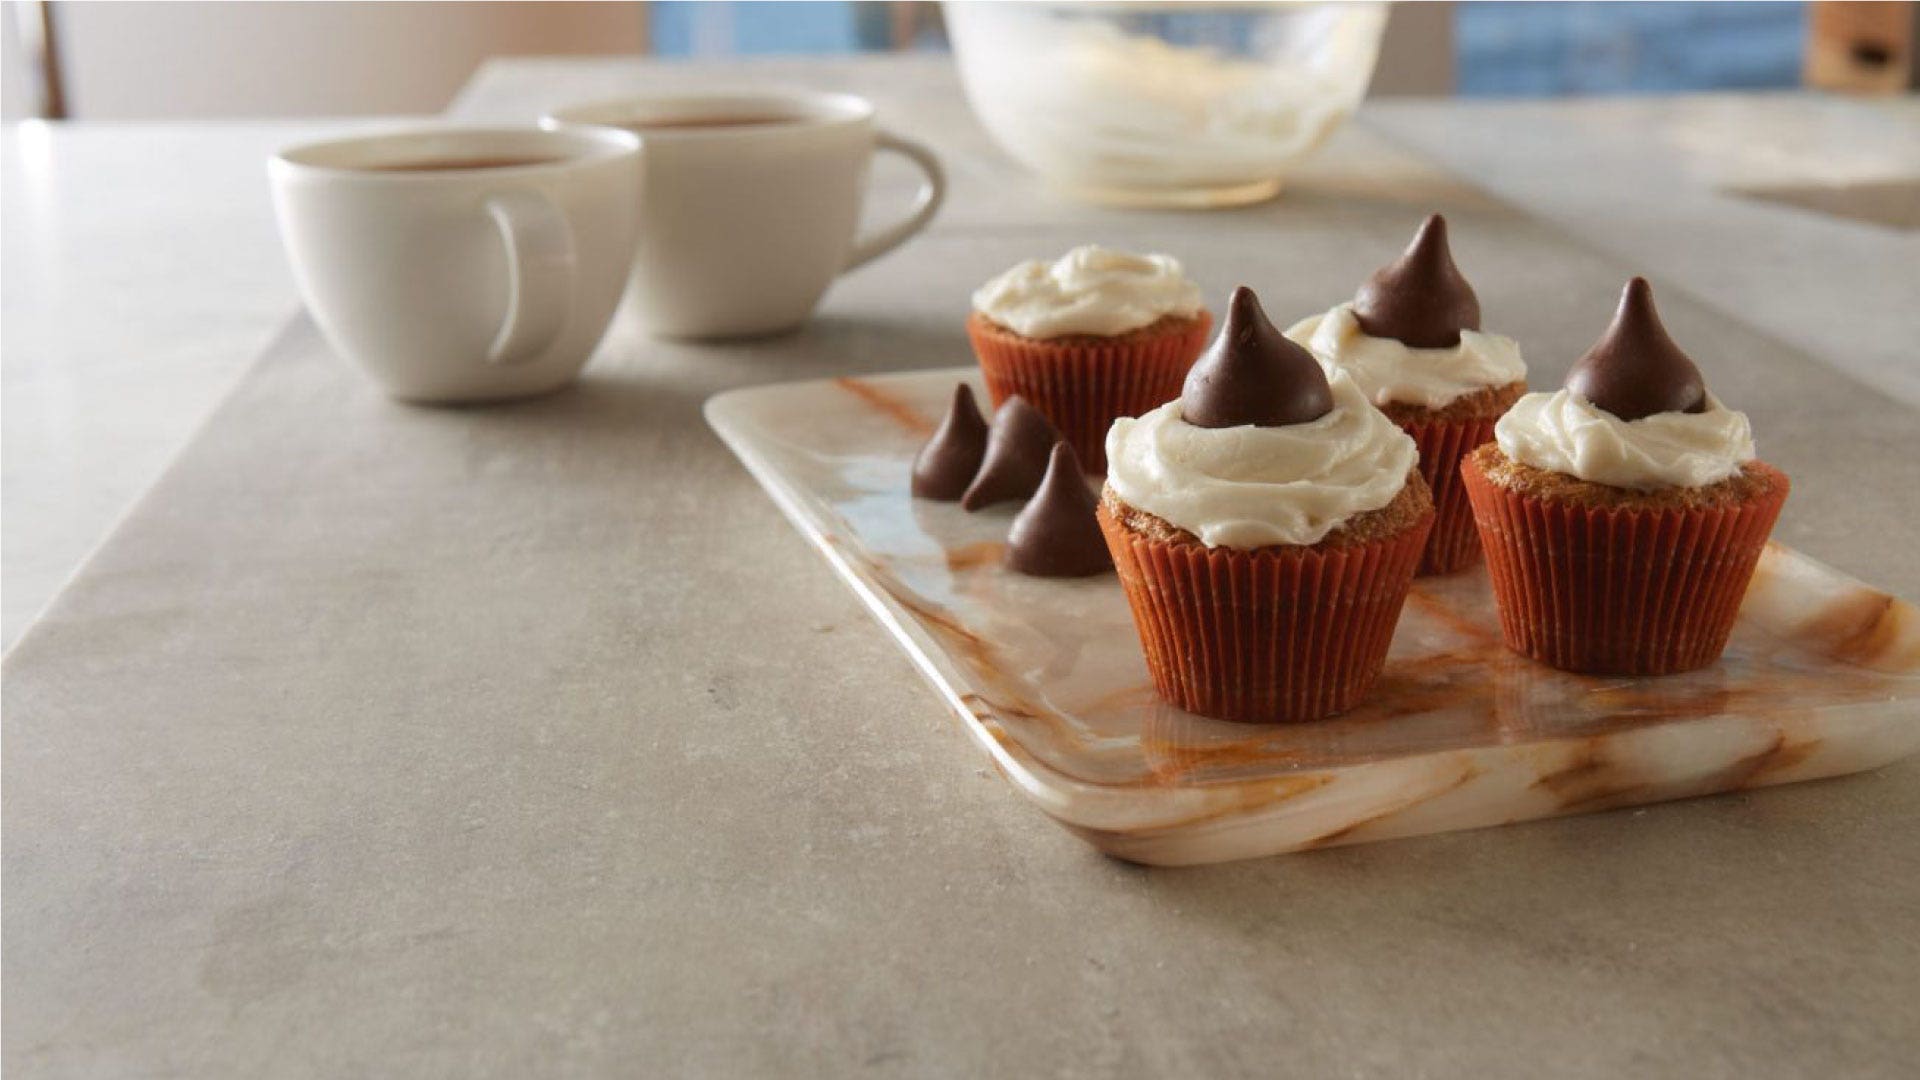 Hershey's KISSES With Almonds topped mini carrot cupcakes